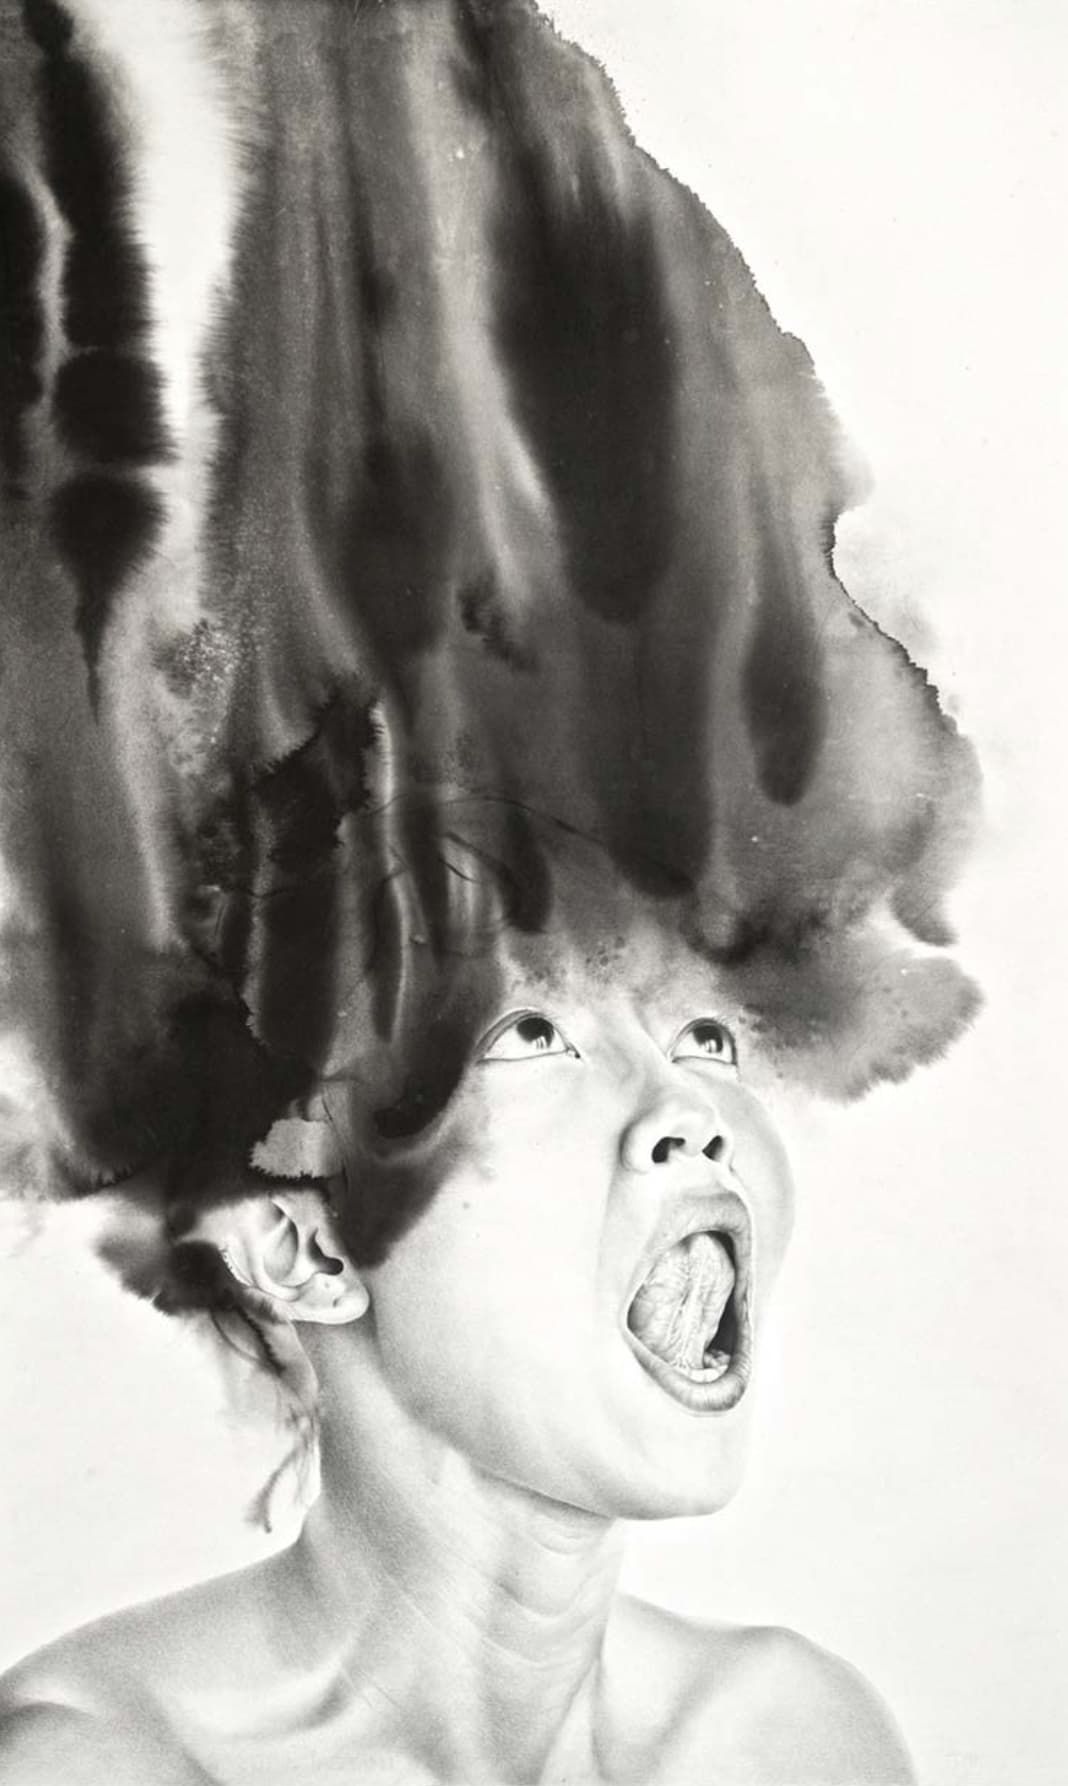 These Pencil Drawings Prove the True Mastery in Art | Widewalls